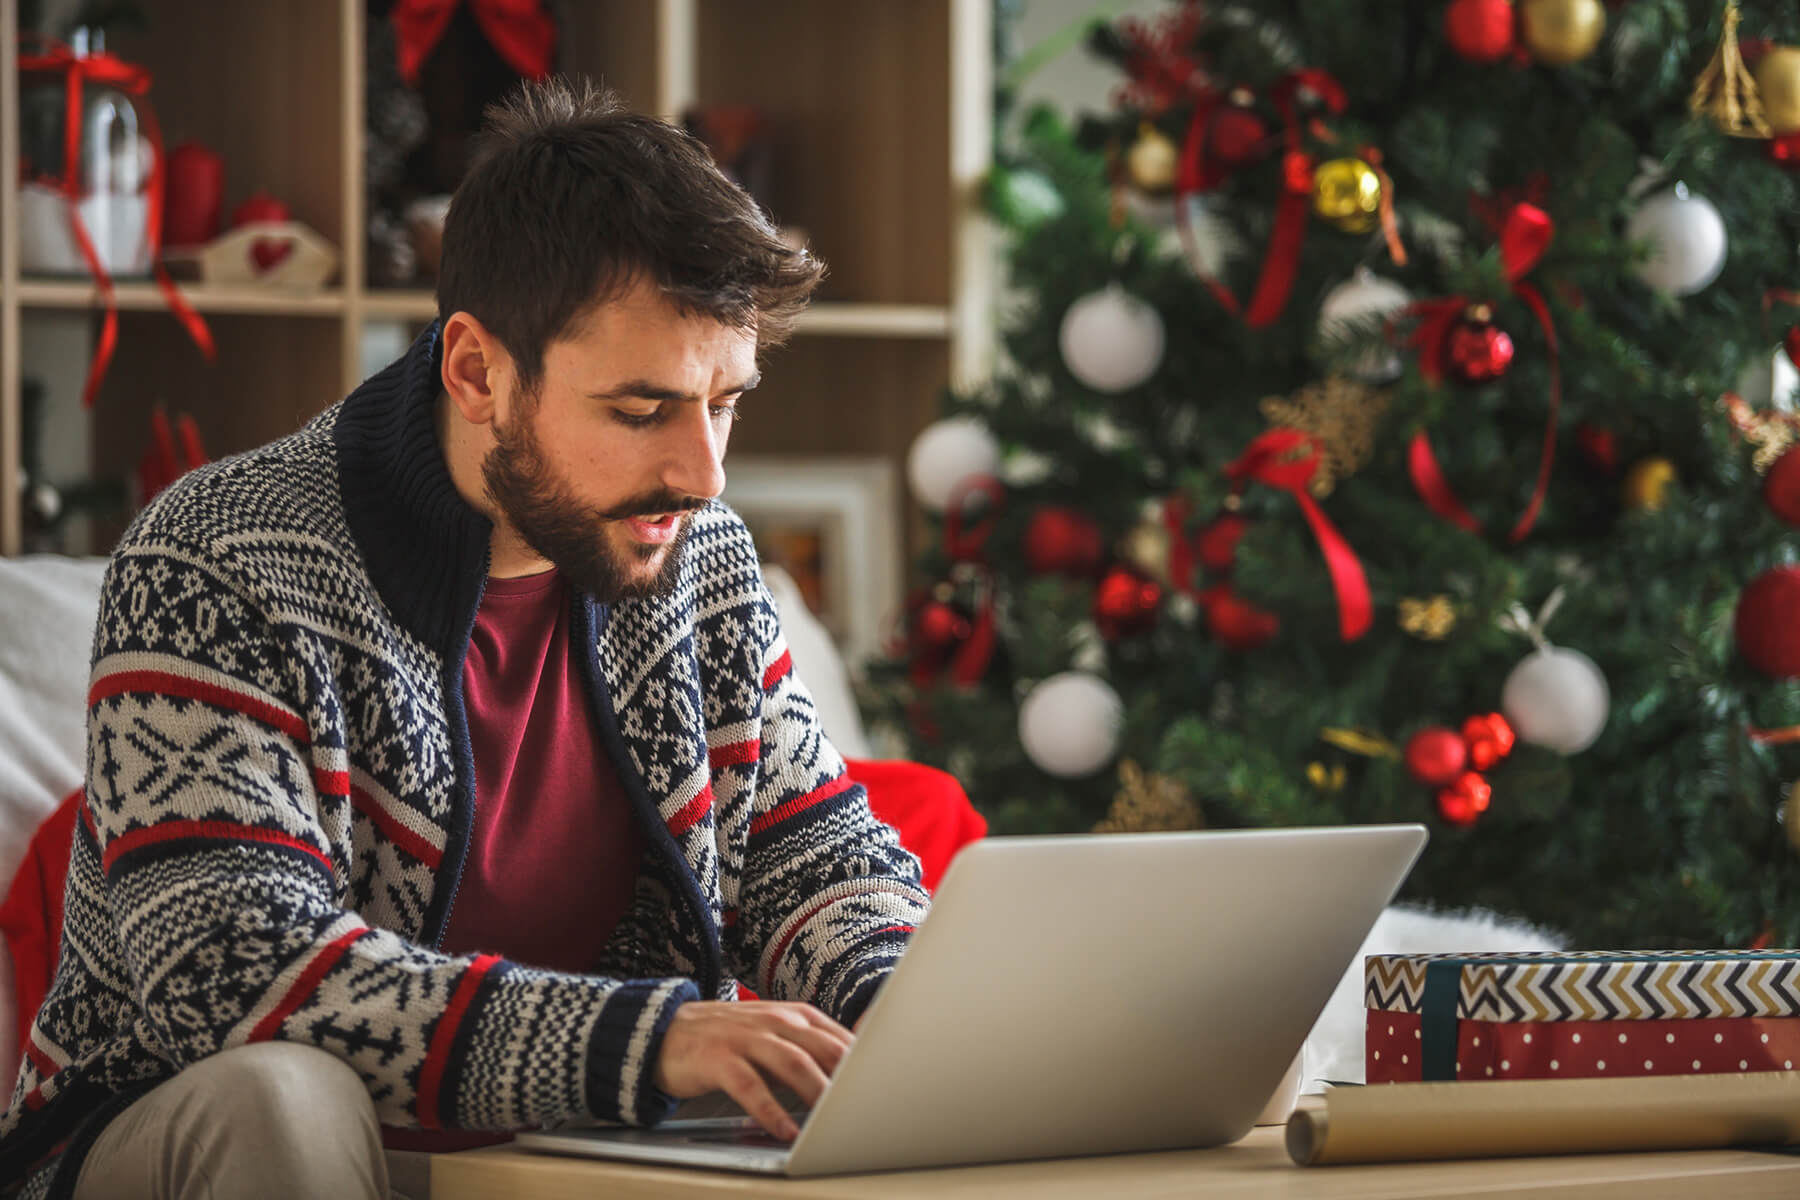 Man sits with a laptop in his living room, decorated for the holidays